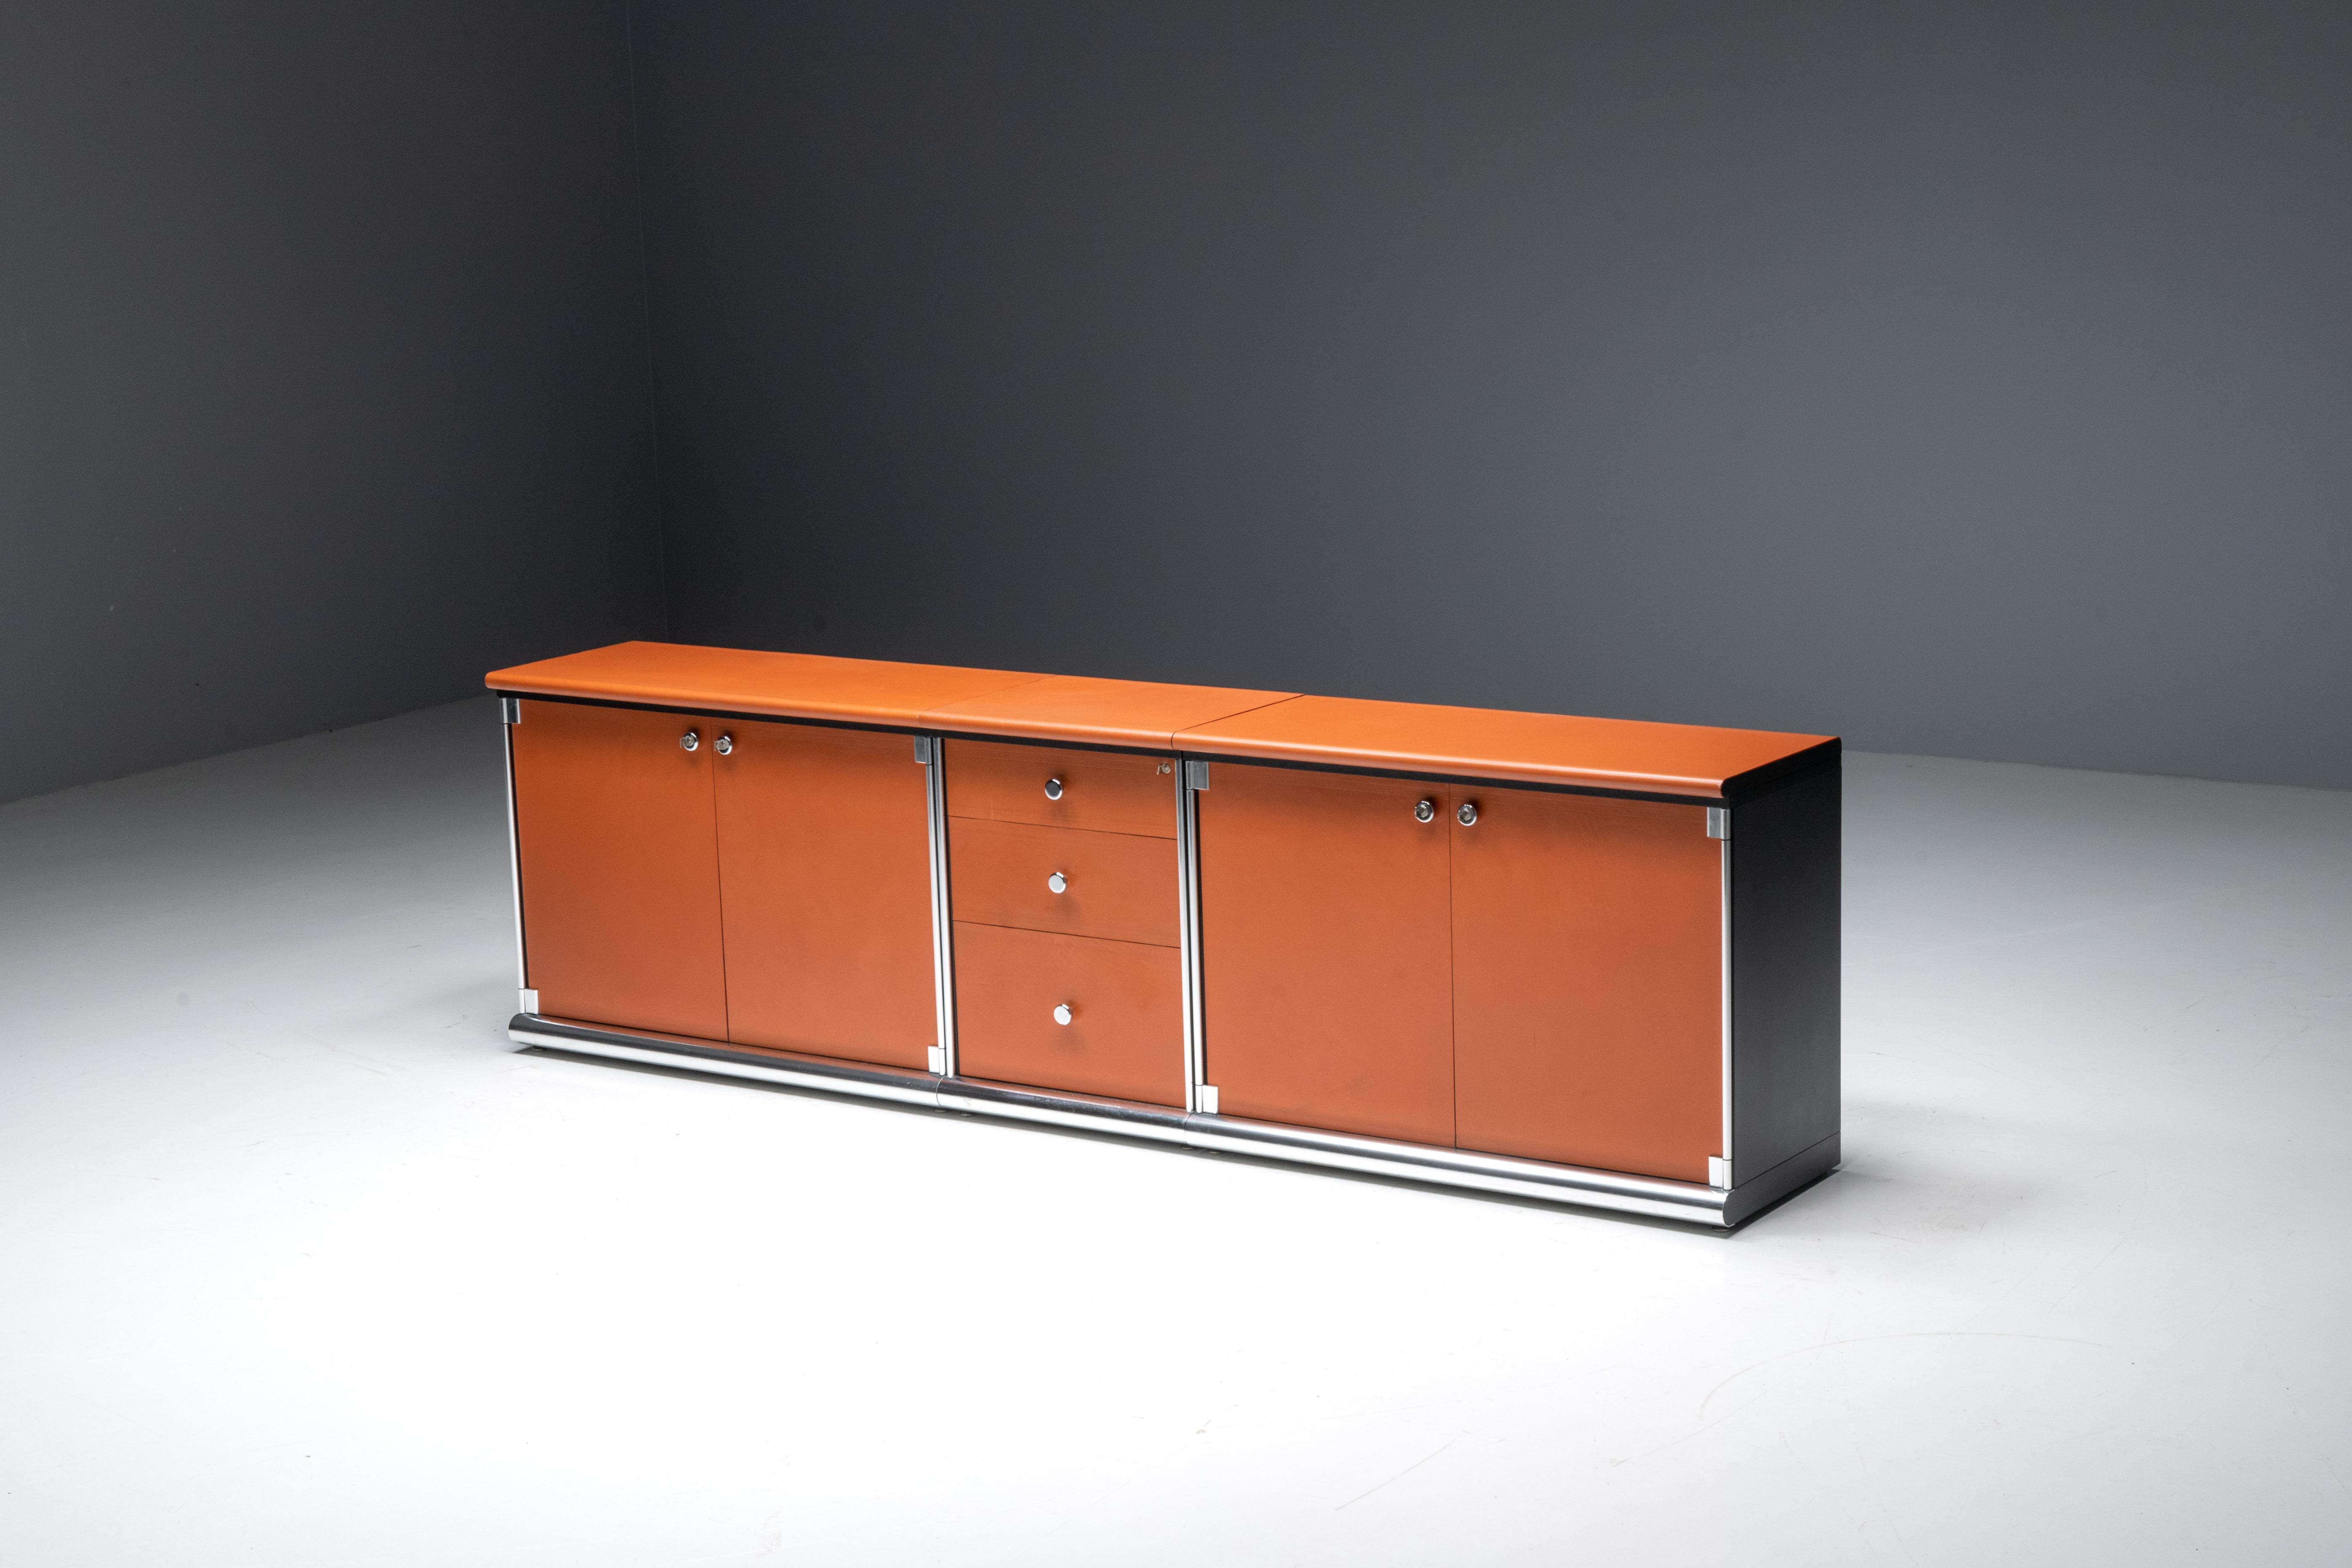 This sideboard is a captivating creation by the renowned Italian designer Guido Faleschini for I4 Mariani. Enveloped in a luscious red cognac leather, this sideboard exudes a bold and vivid aura reminiscent of the seventies. Comprising two cabinets